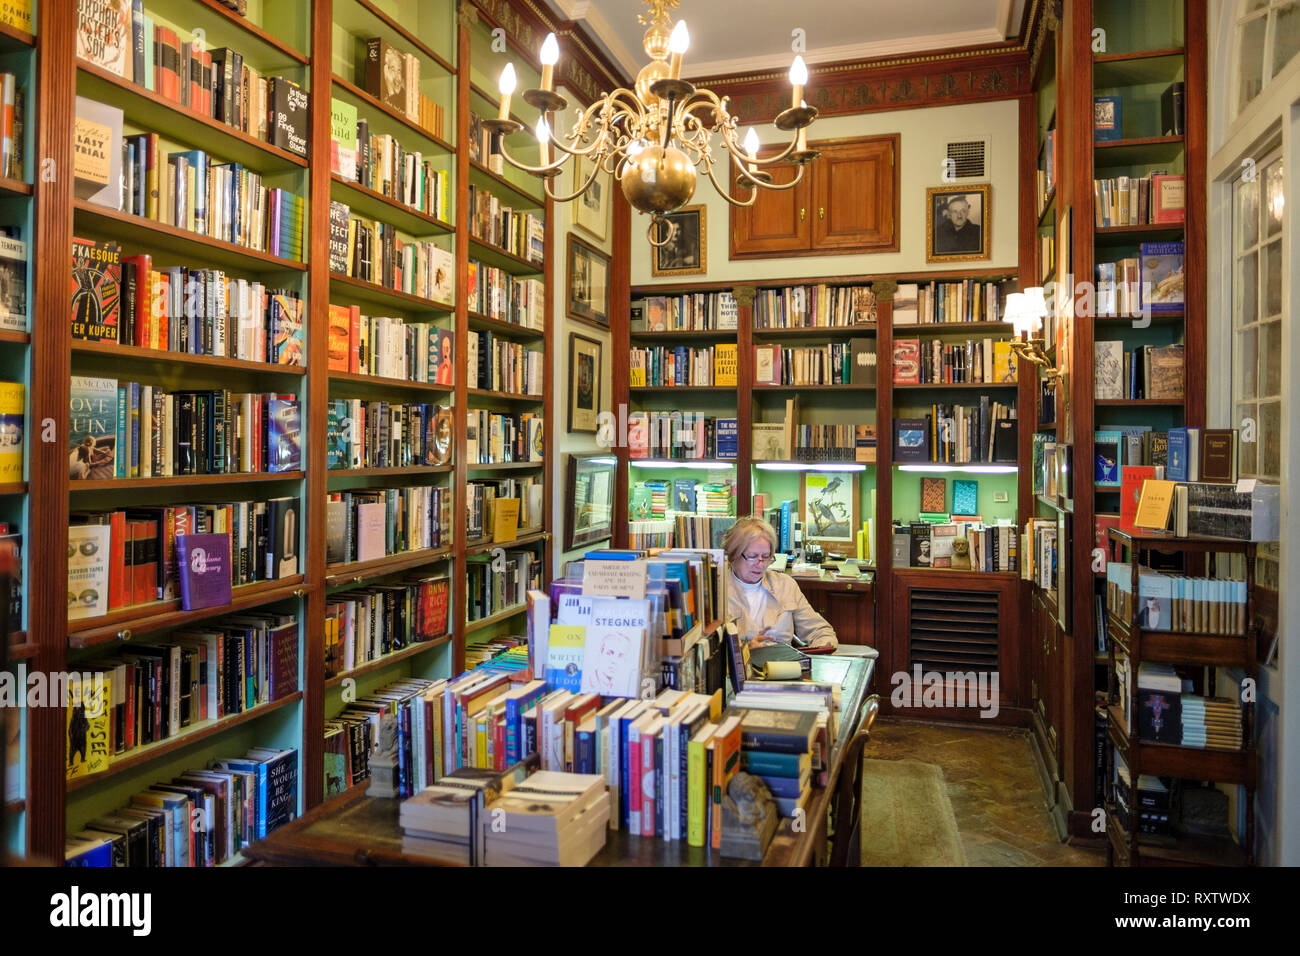 Woman reading, interior of Faulkner House Books, bookstore selling William Faulkner's books, Pirate's Alley, New Orleans French Quarter, New Orleans,  Stock Photo